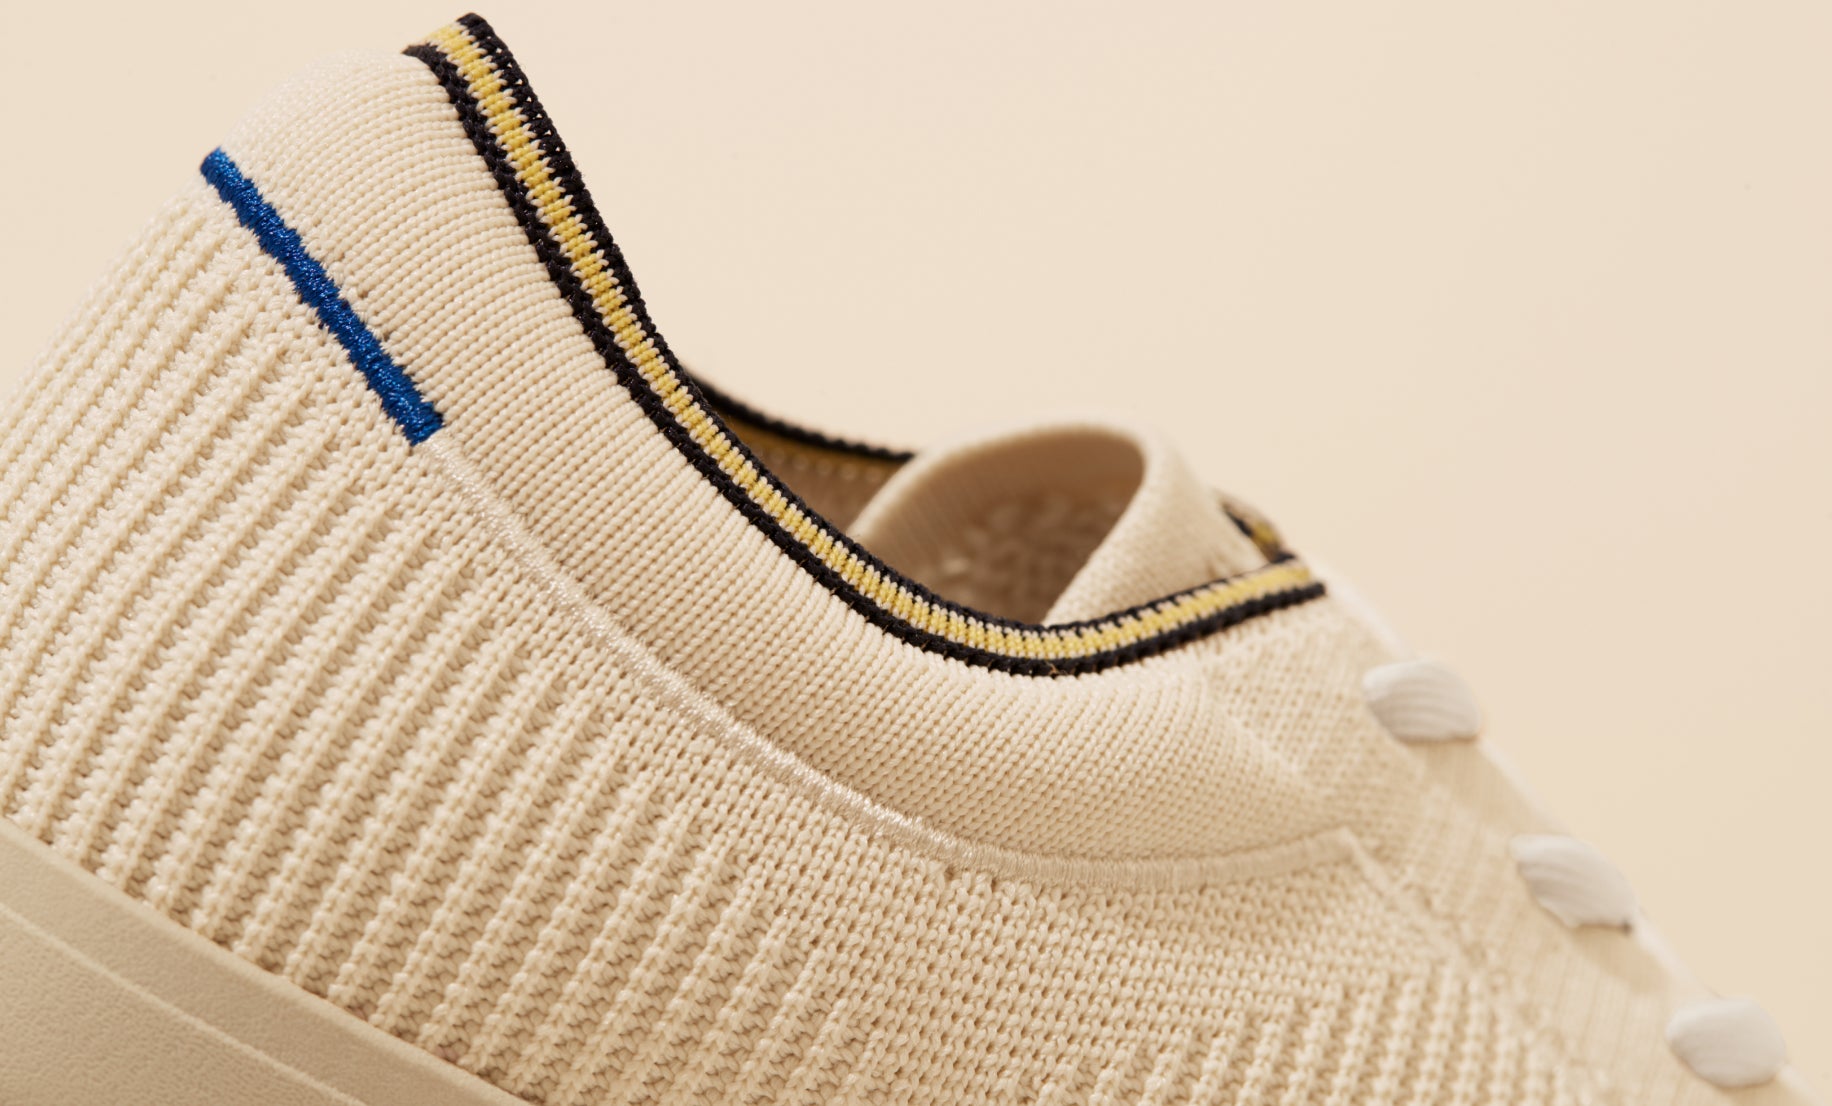 Close up of the plush ankle collar of The Lace Up in Vanilla, showing the navy and yellow striped ankle piping detail. 